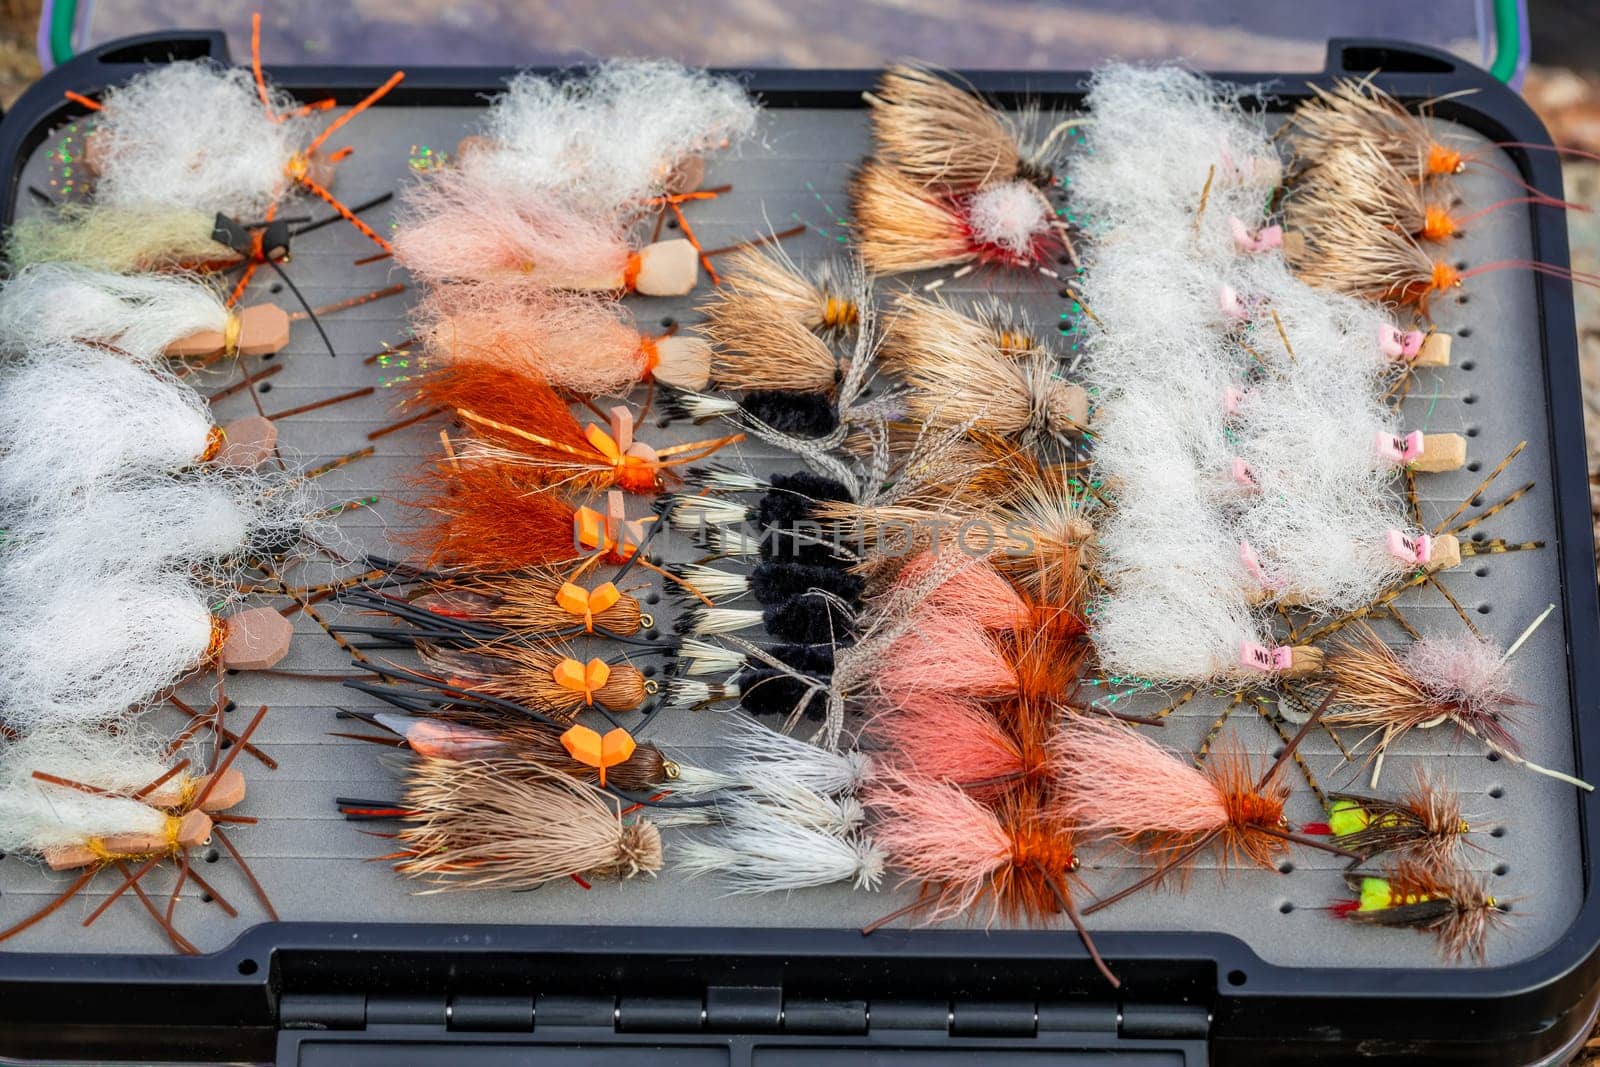 Fly Fishing Box Selection at the River by joshuaraineyphotography